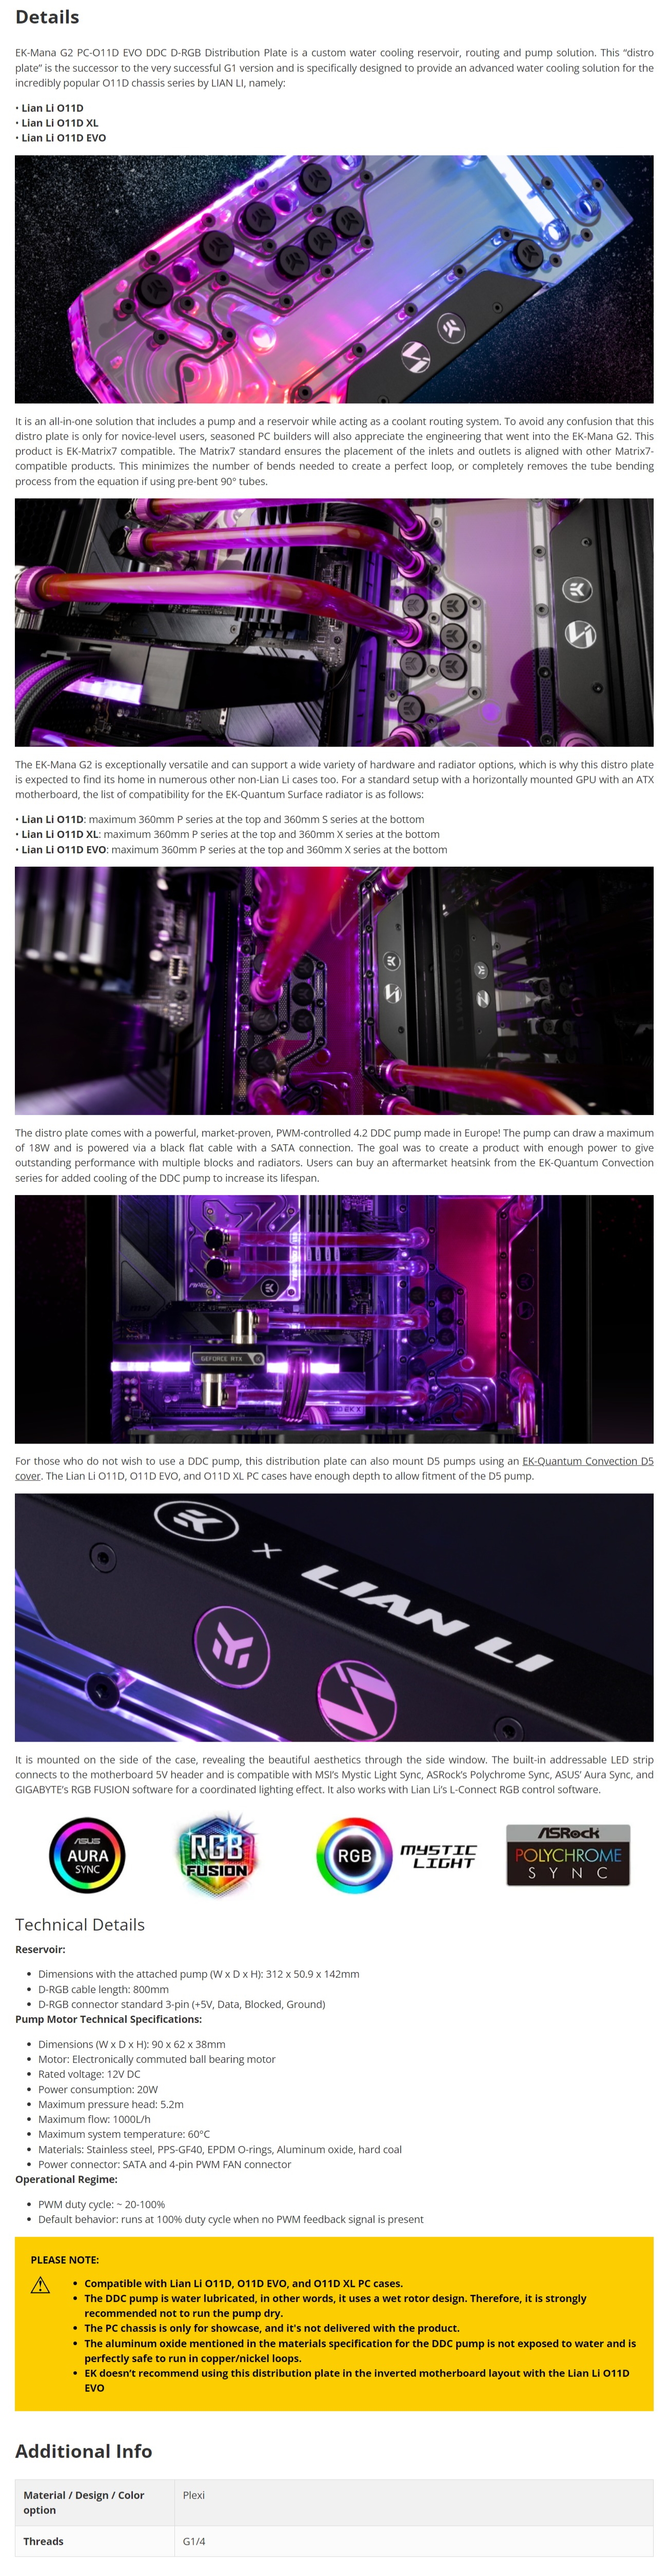 A large marketing image providing additional information about the product EK Mana G2 PC-O11D EVO DDC D-RGB Distribution Plate - Additional alt info not provided